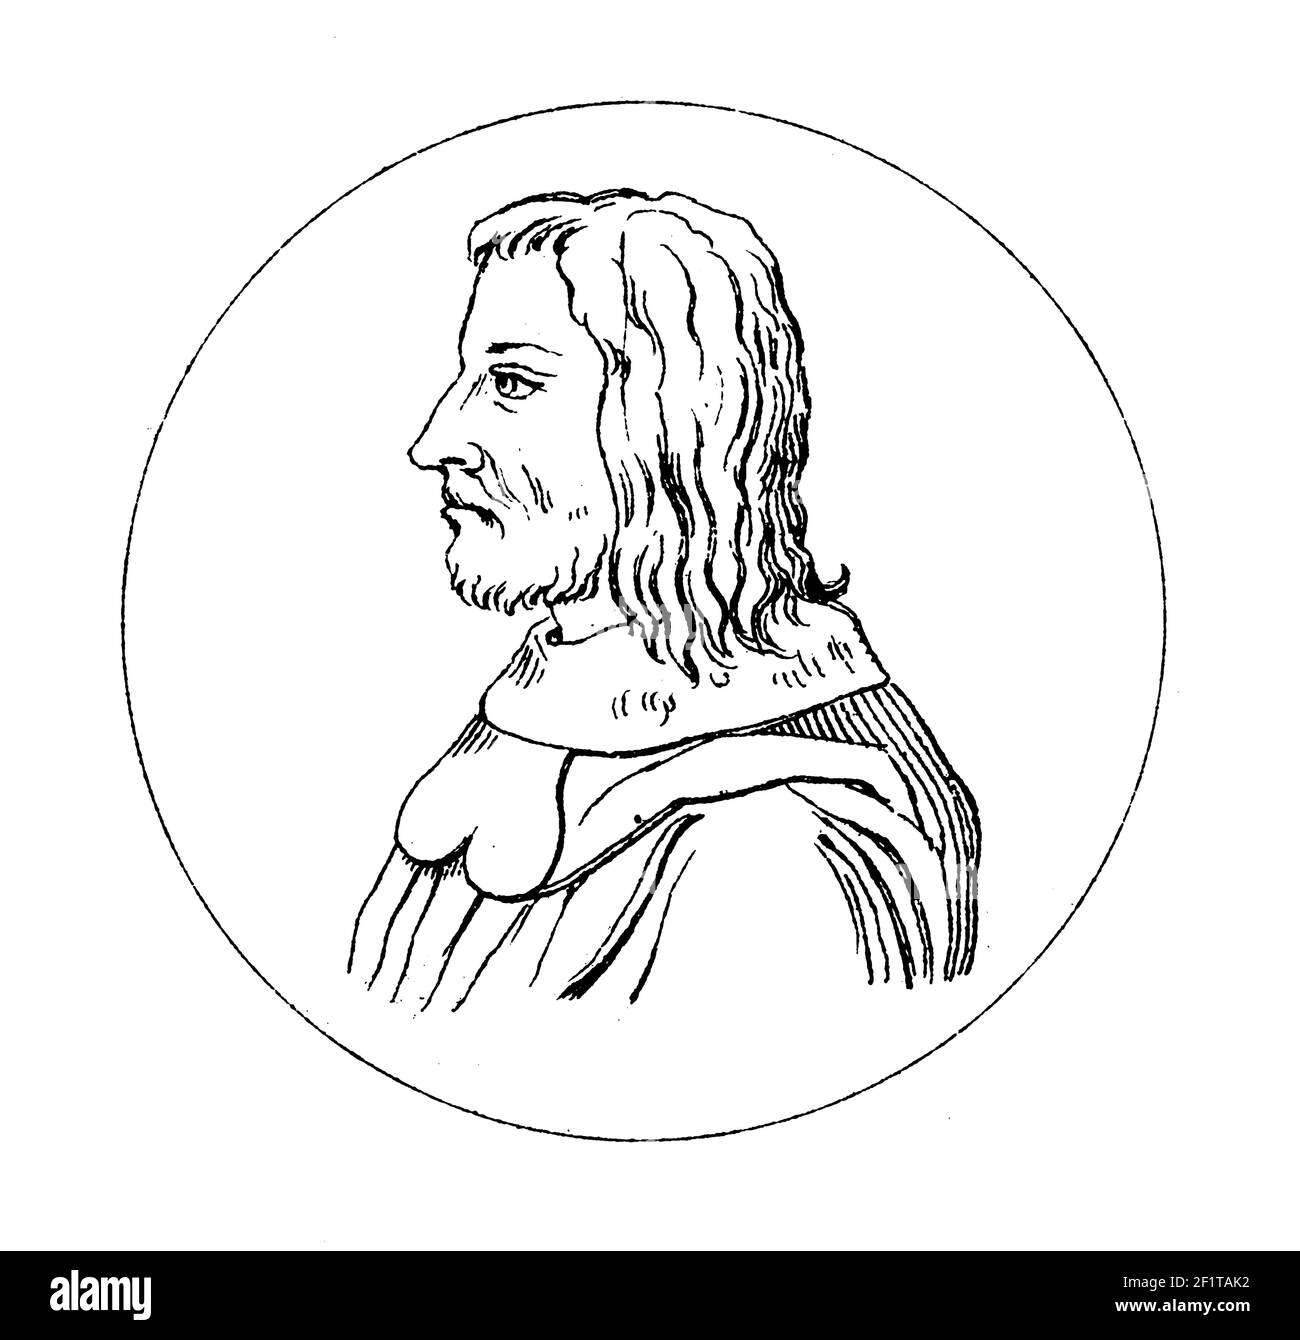 19th-century illustration of a portrait of John II, King of France. He was born on April 16, 1319 in Le Mans, France and died on April 8, 1364 in Lond Stock Photo